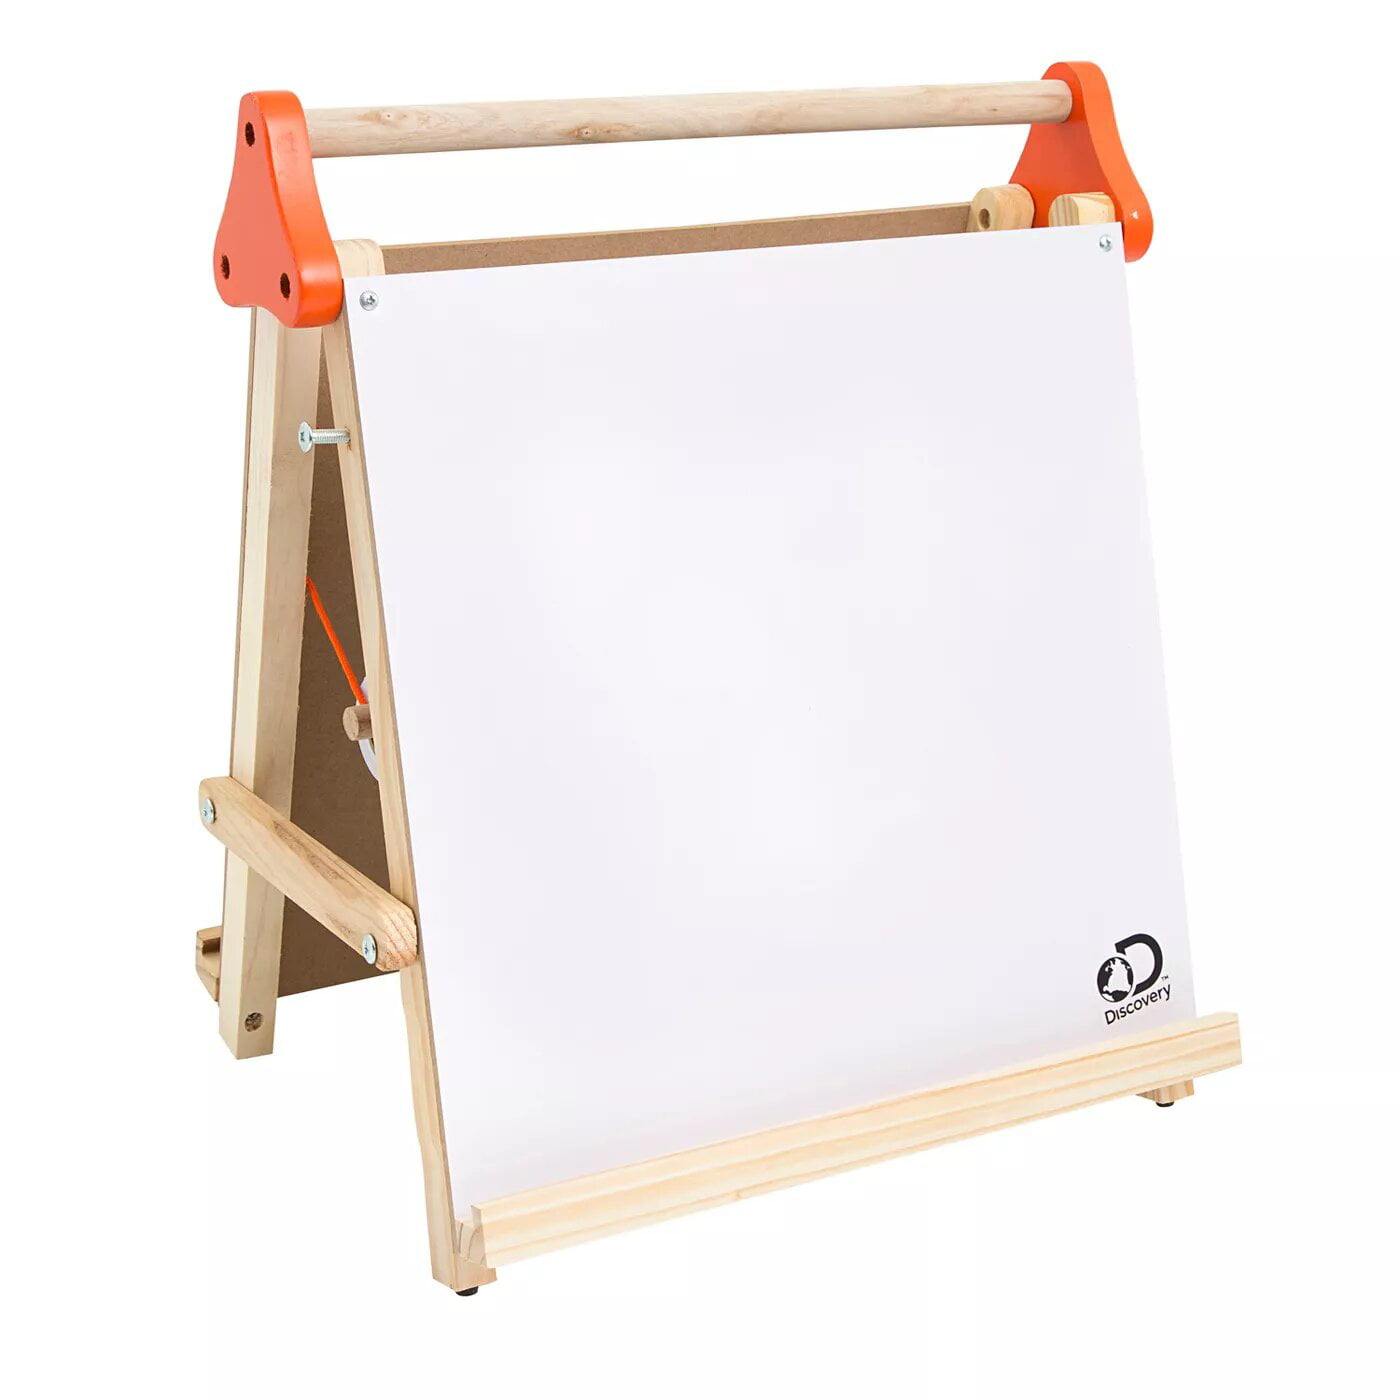 Buy Discovery Create & Paint Easel